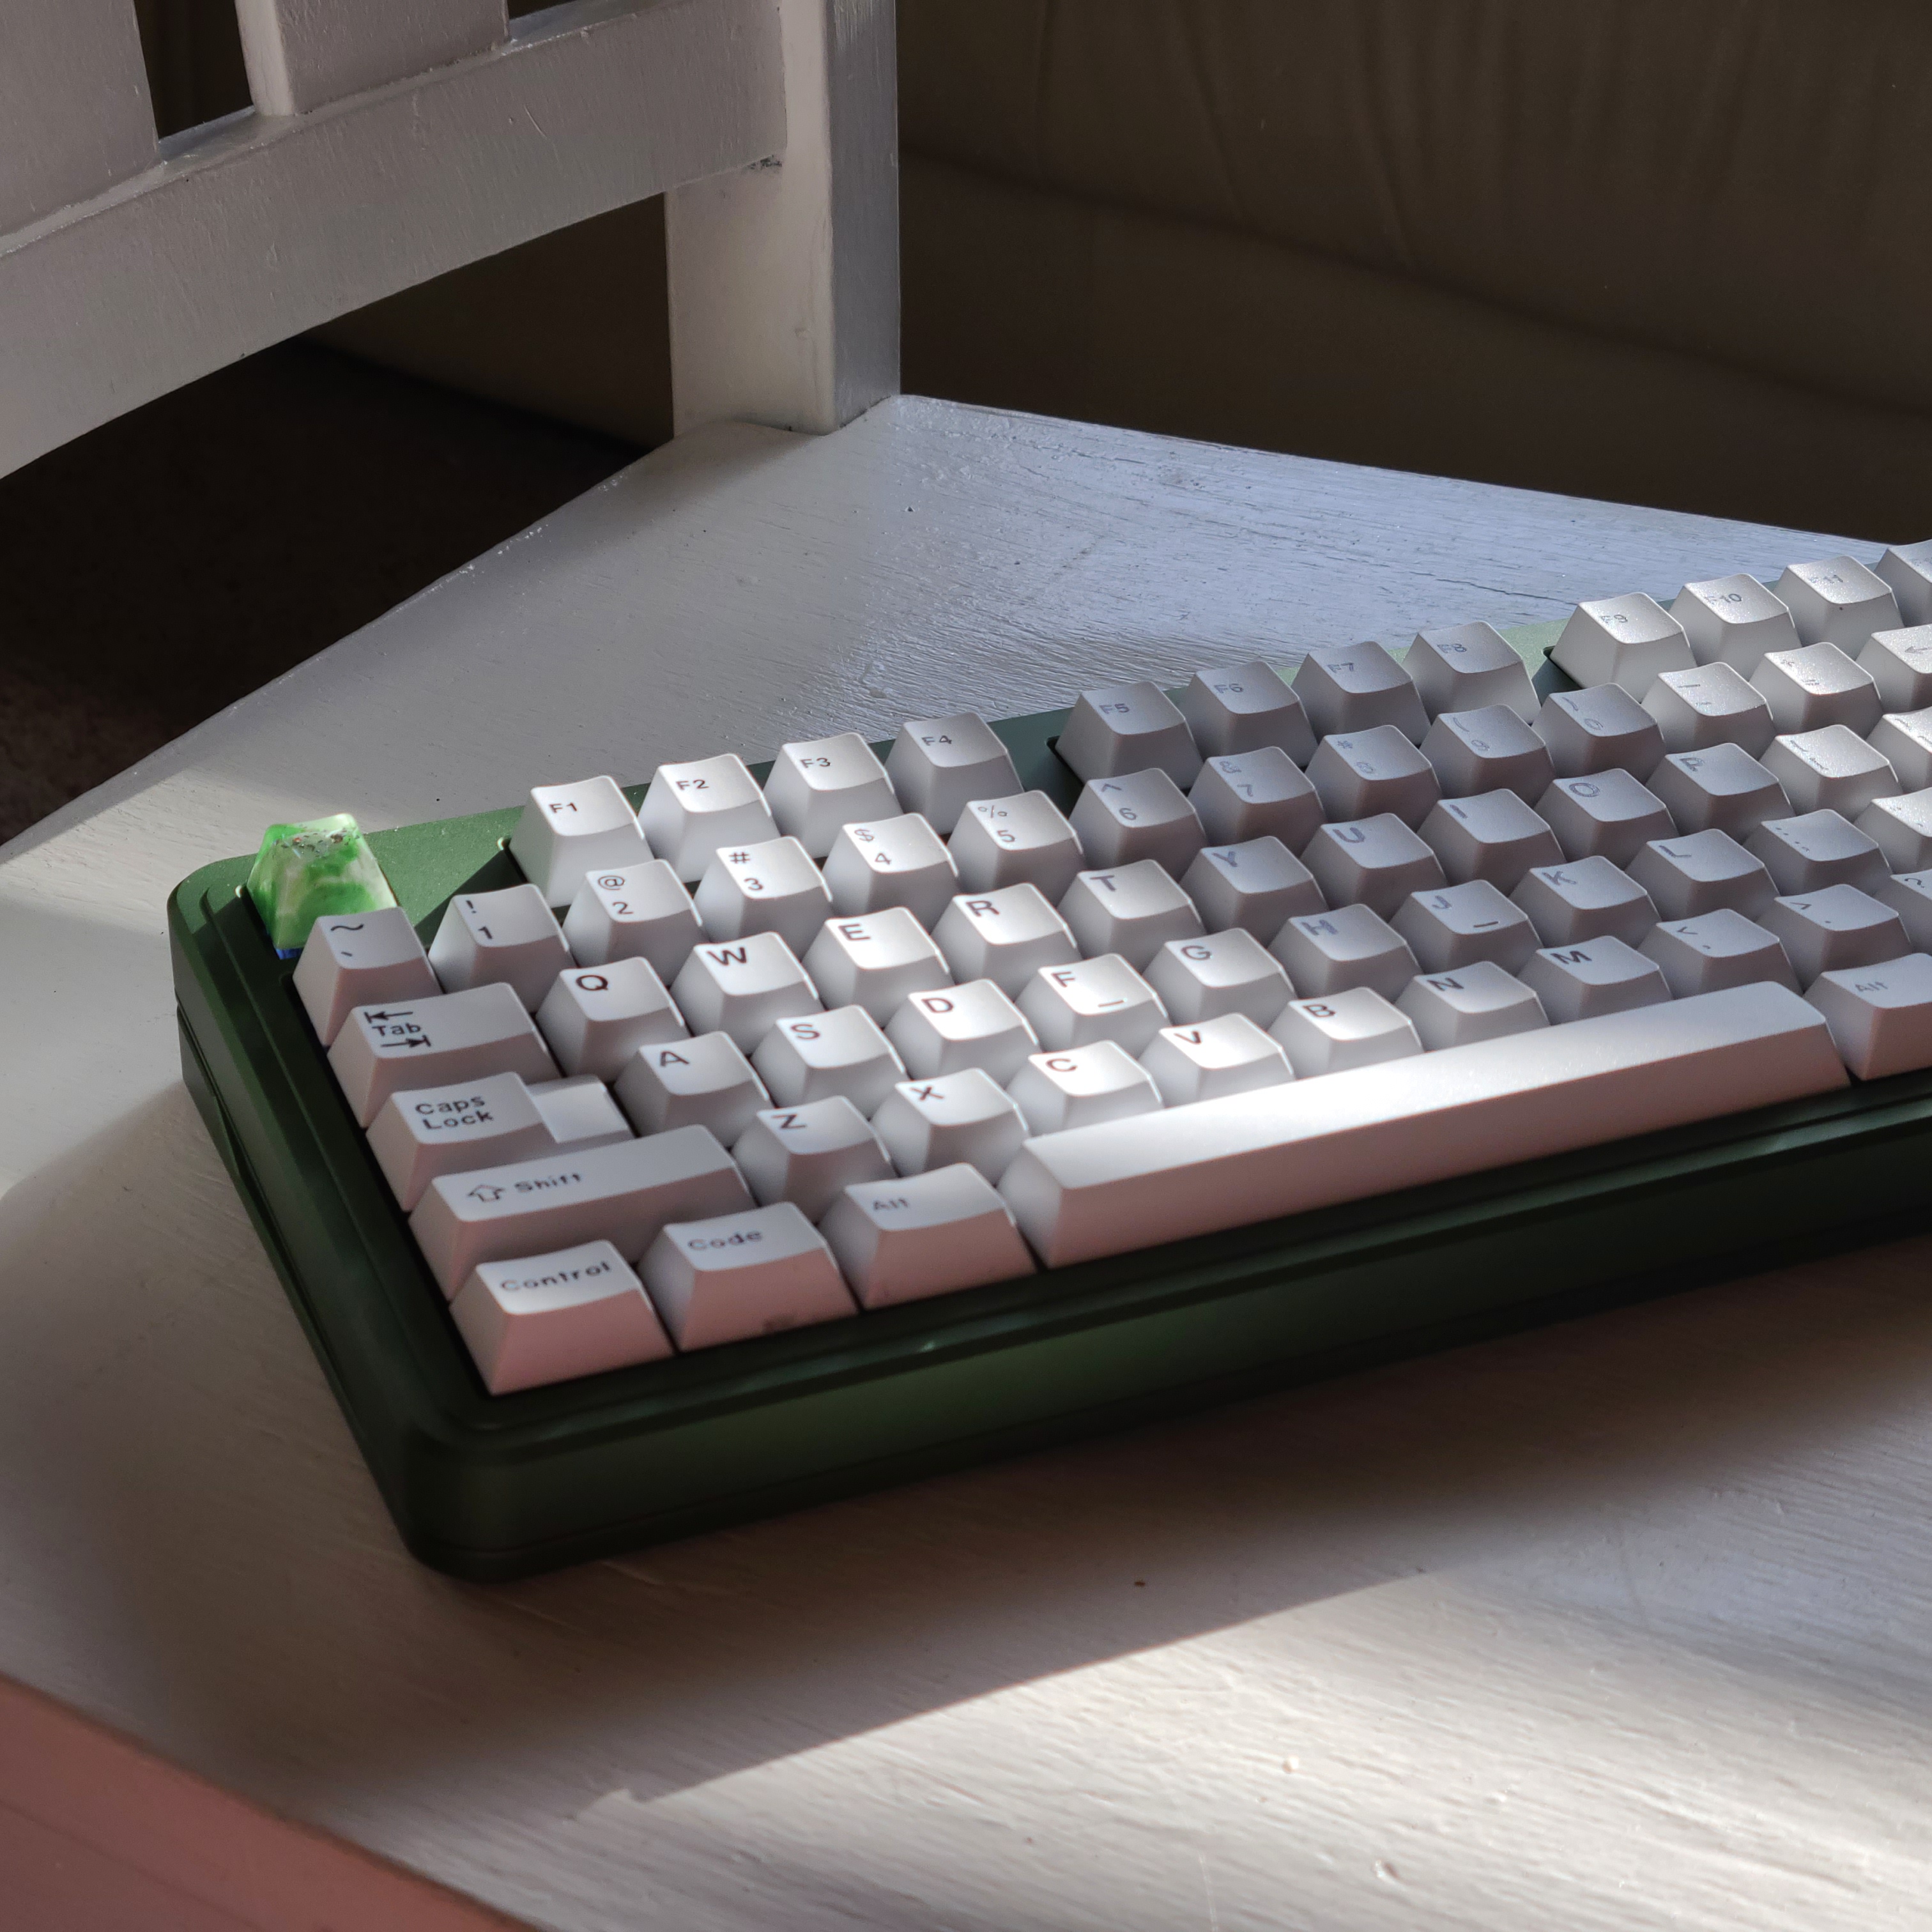 Space80 w/ PBT BoW